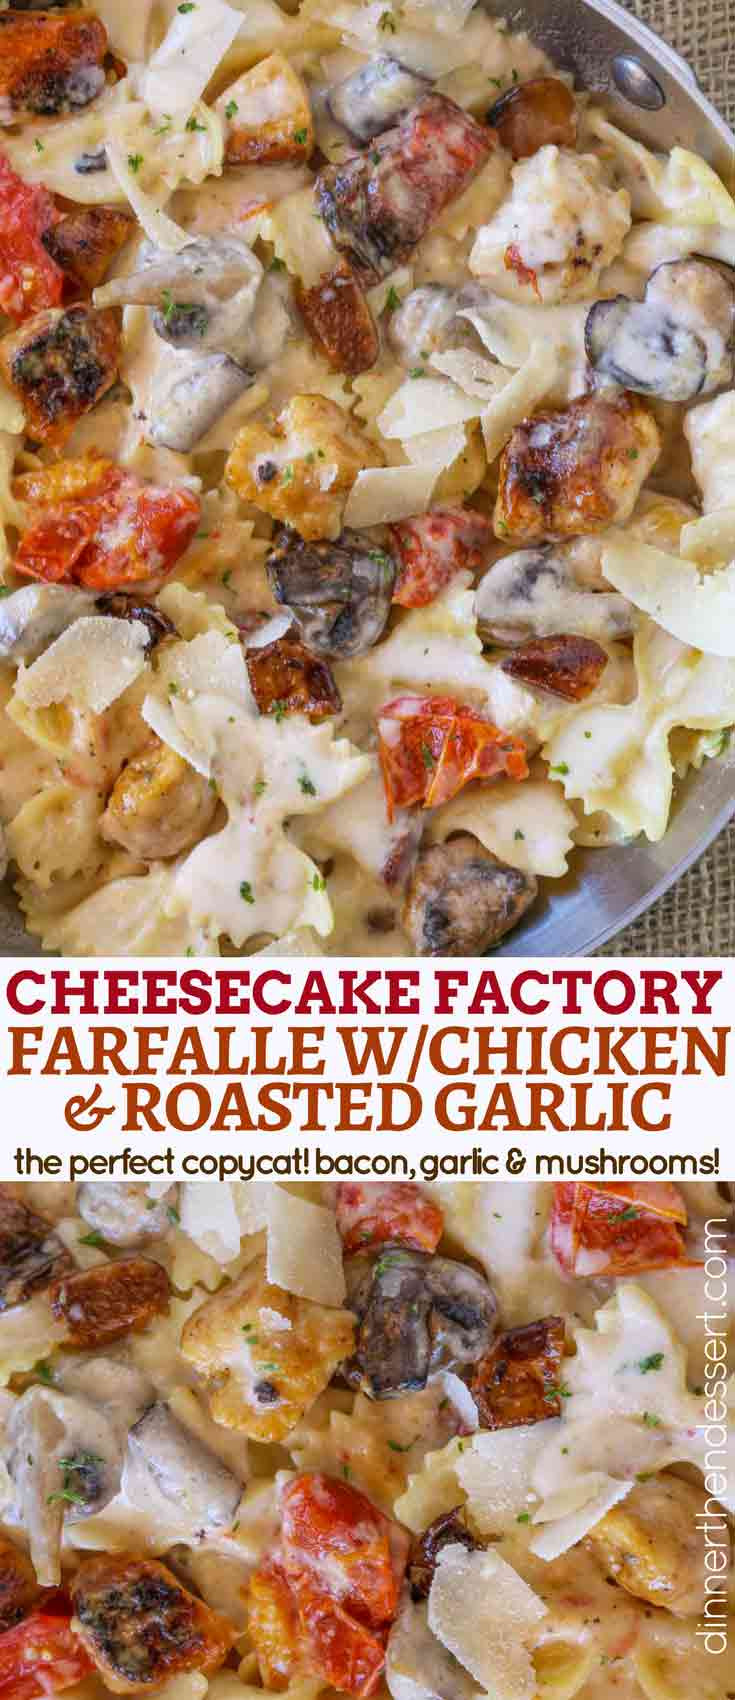 Cheesecake Factory Farfalle With Chicken And Roasted Garlic
 The Cheesecake Factory Farfalle with Chicken and Roasted